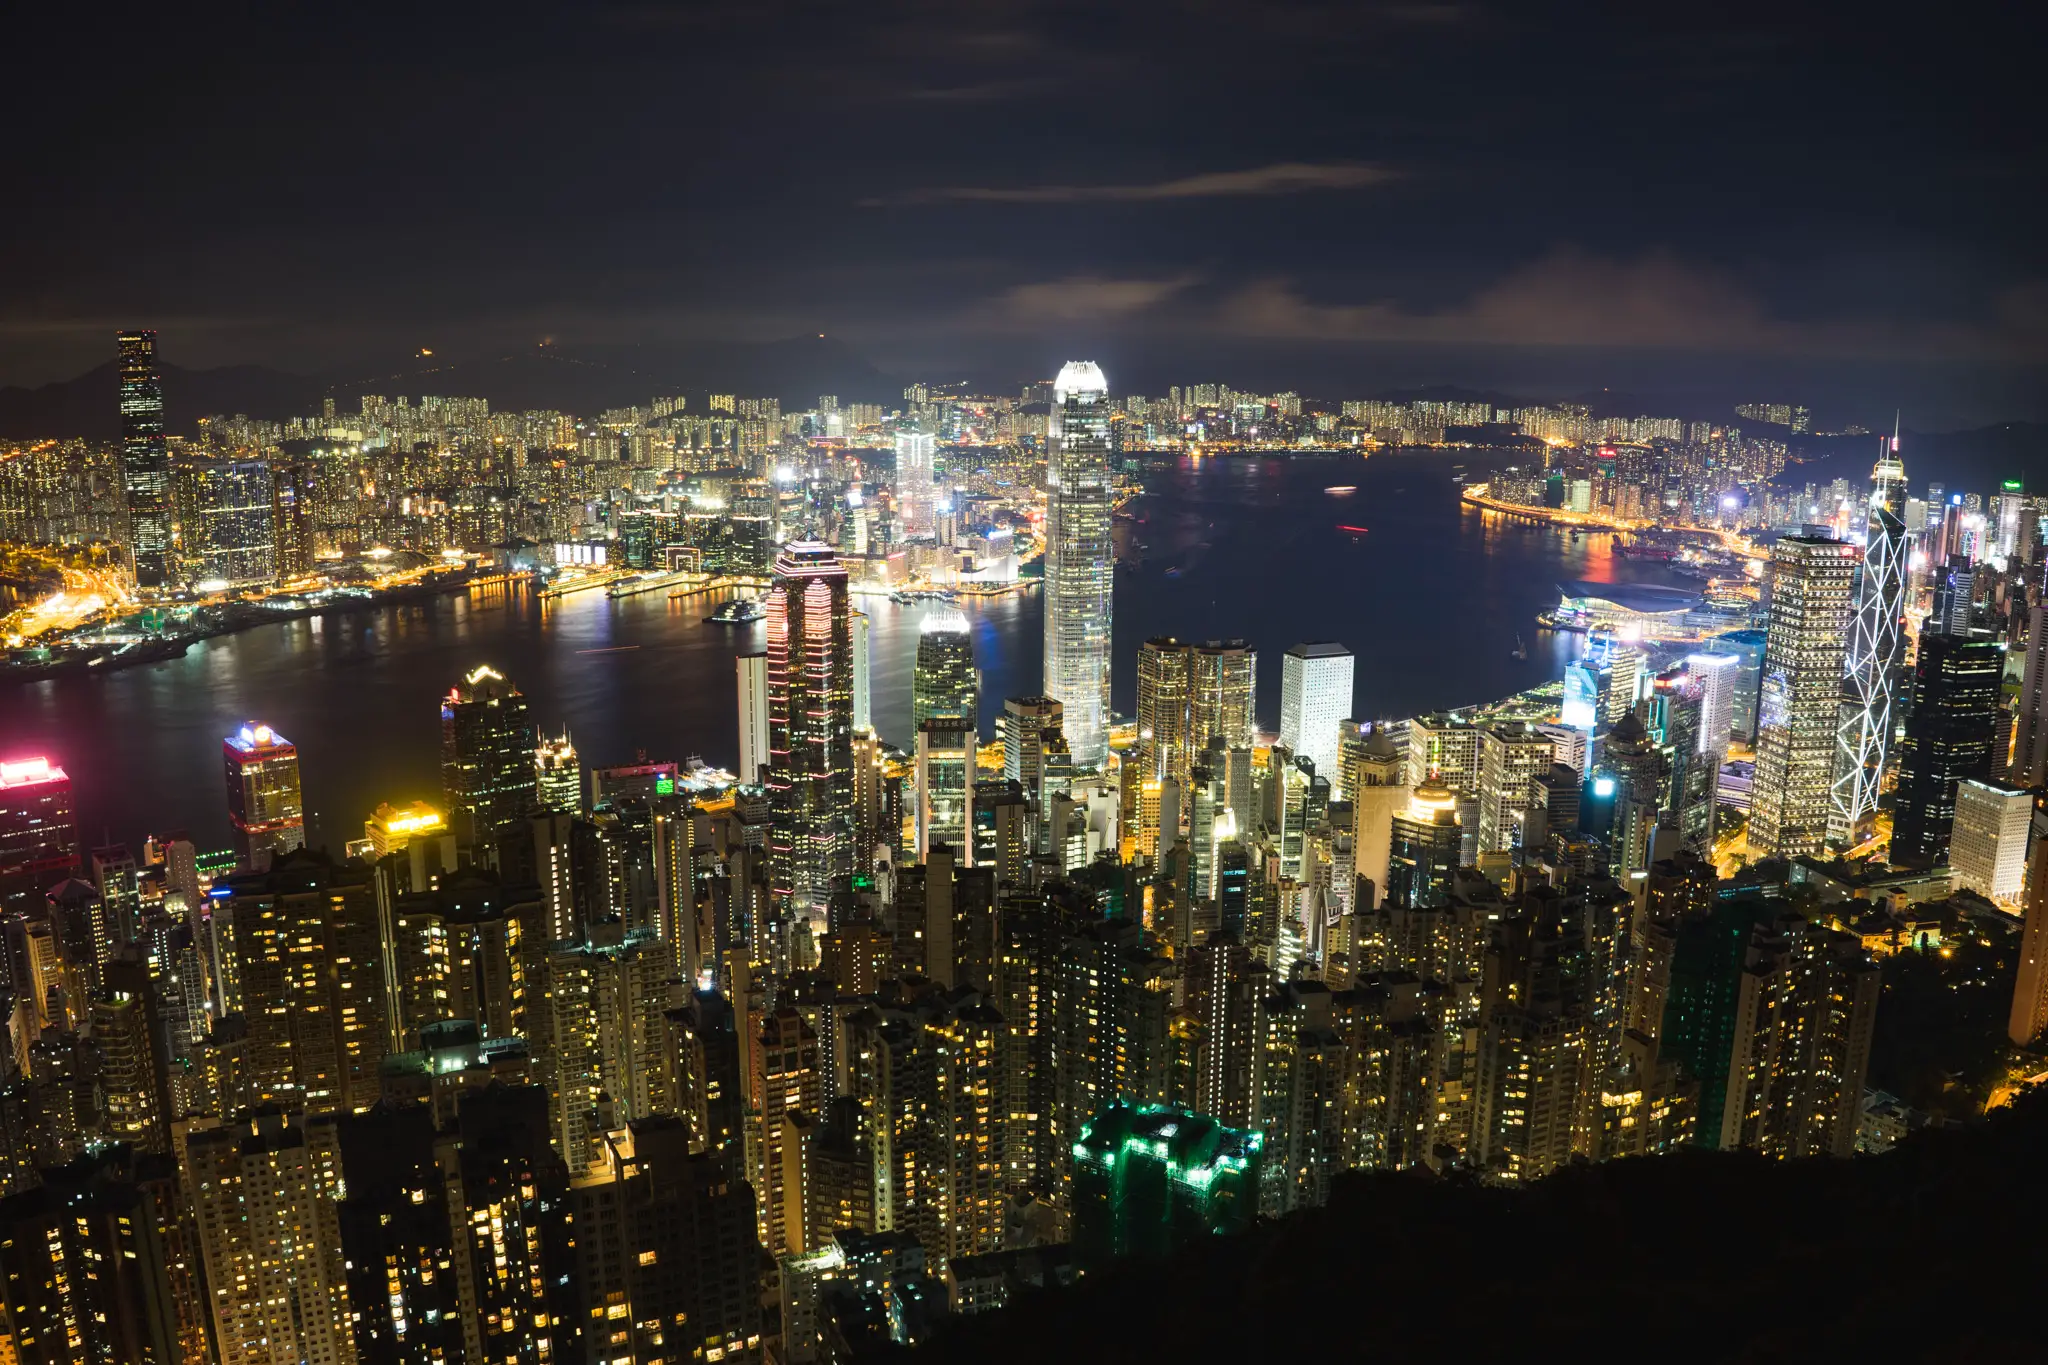 The epic Hong Kong skyline, viewed from Victoria Peak